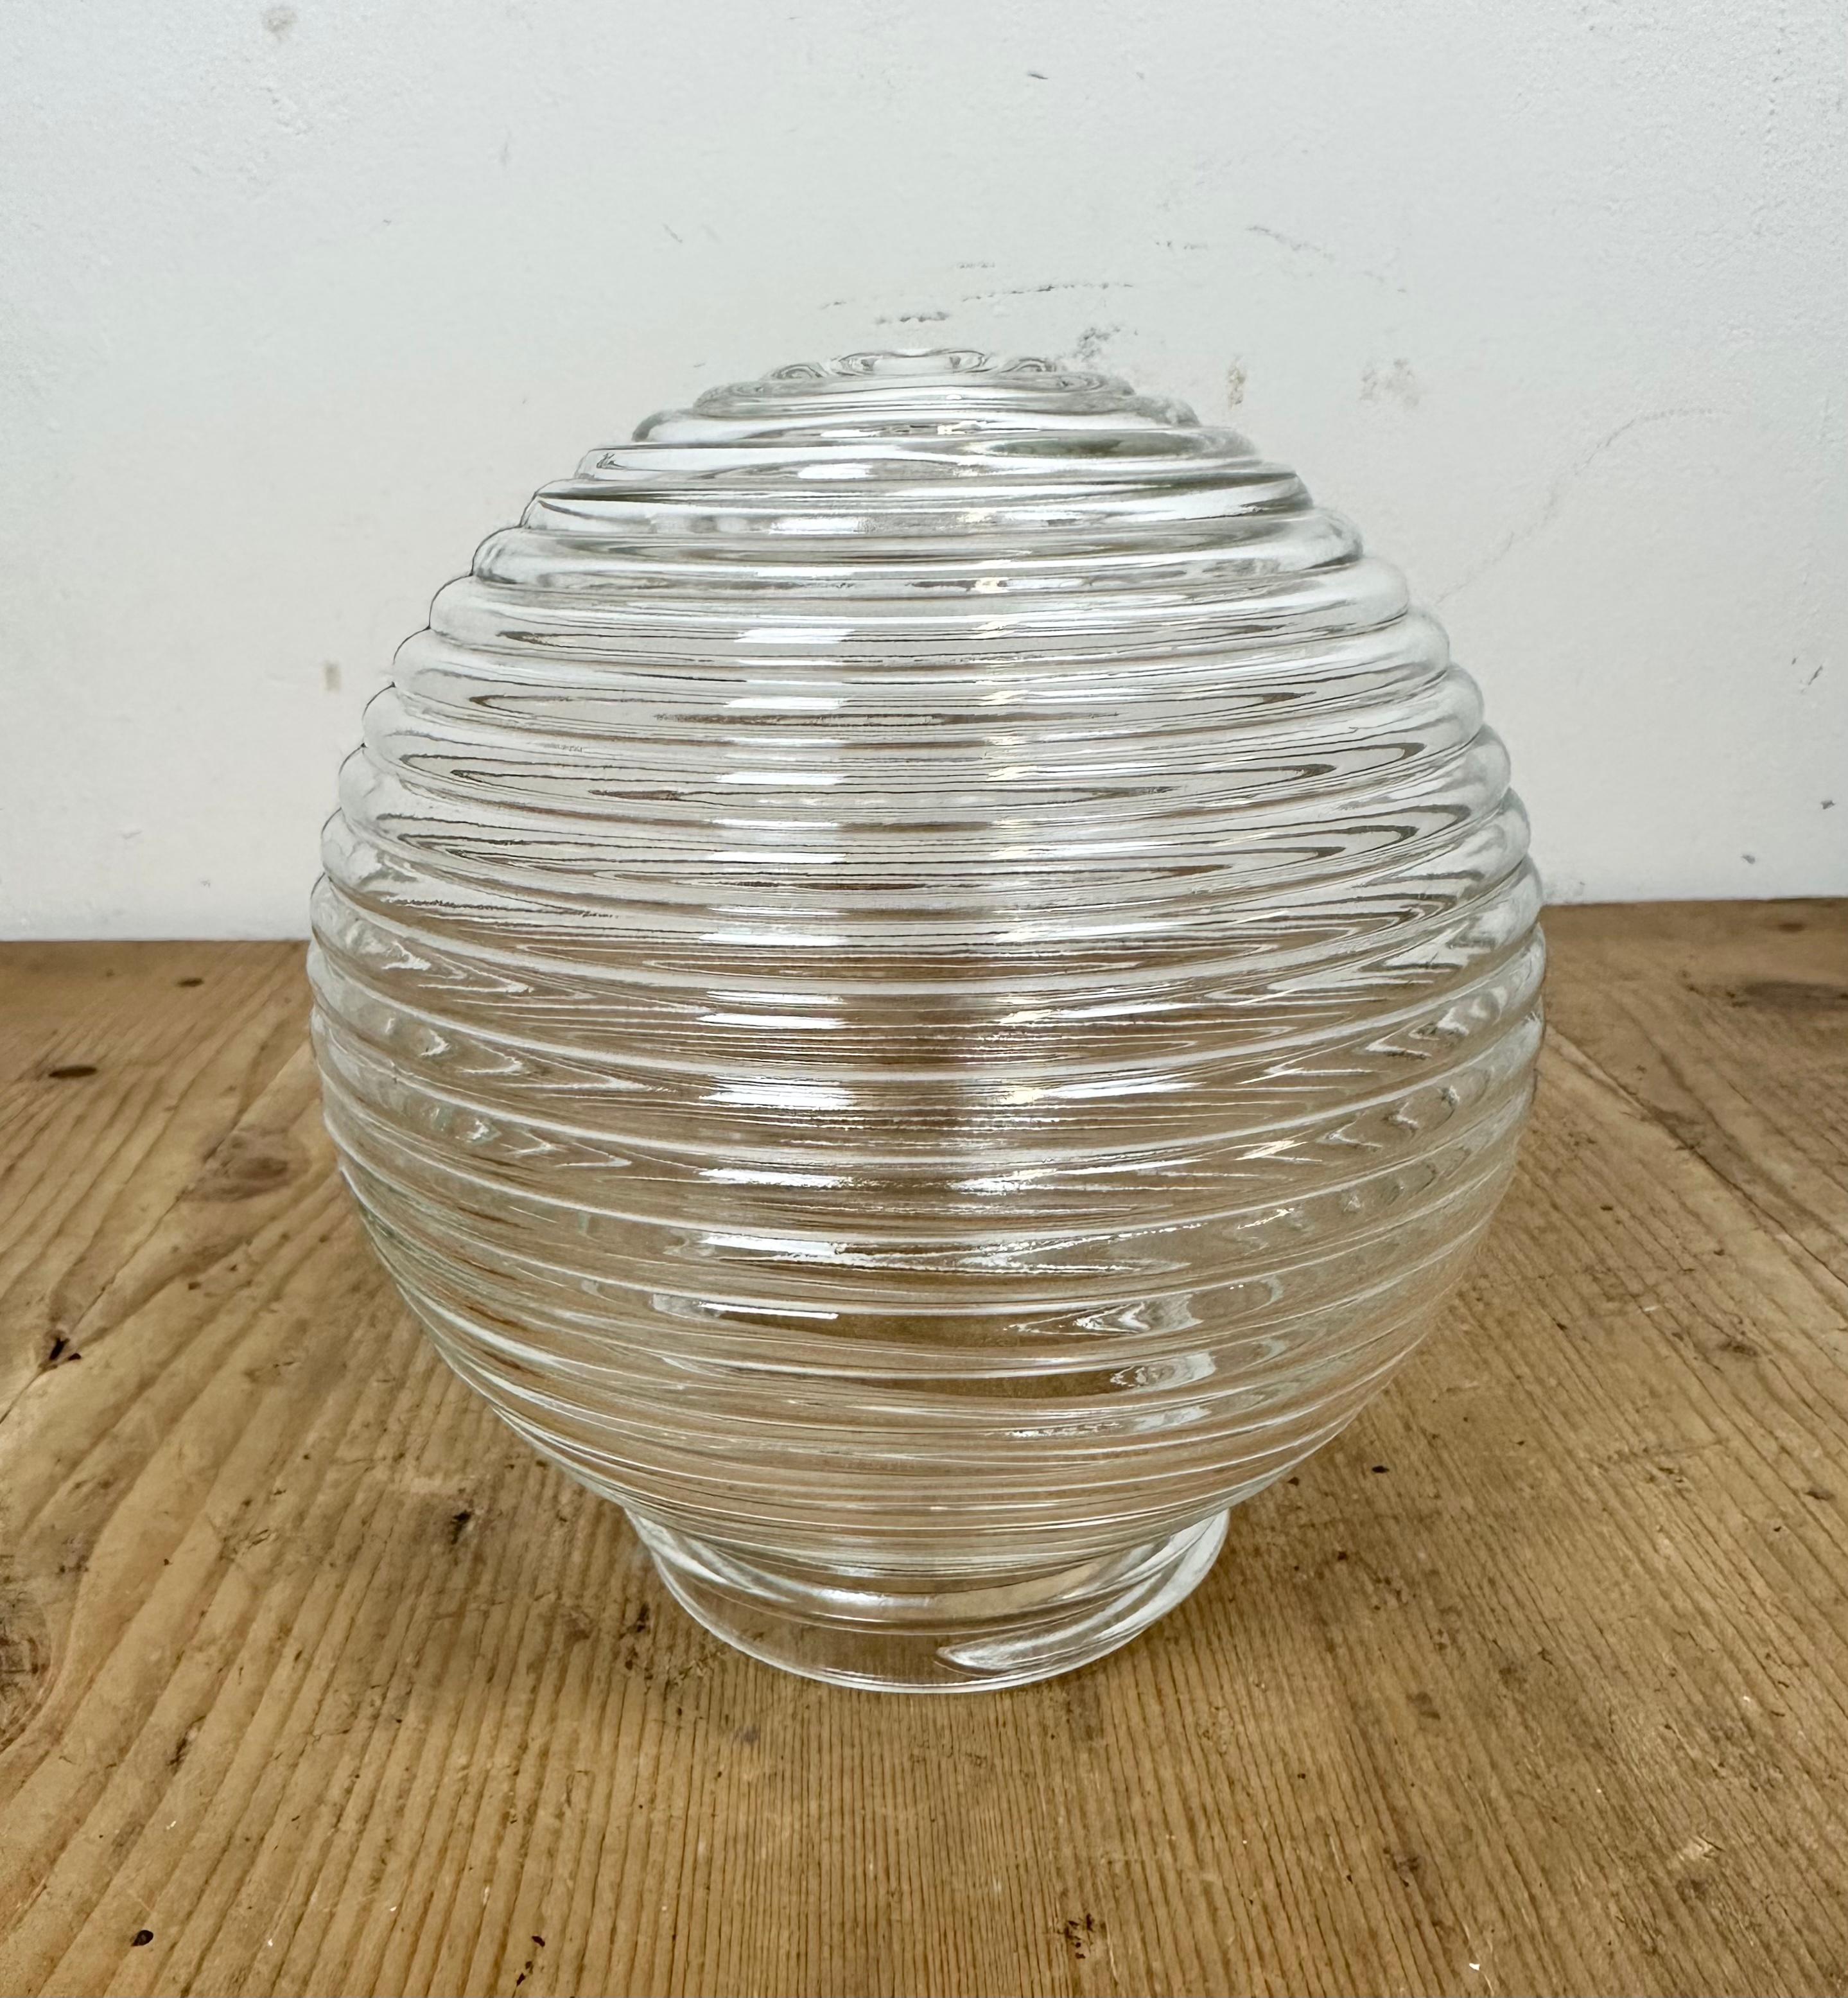 Industrial White Porcelain Pendant Light with Ribbed Glass, 1970s For Sale 5